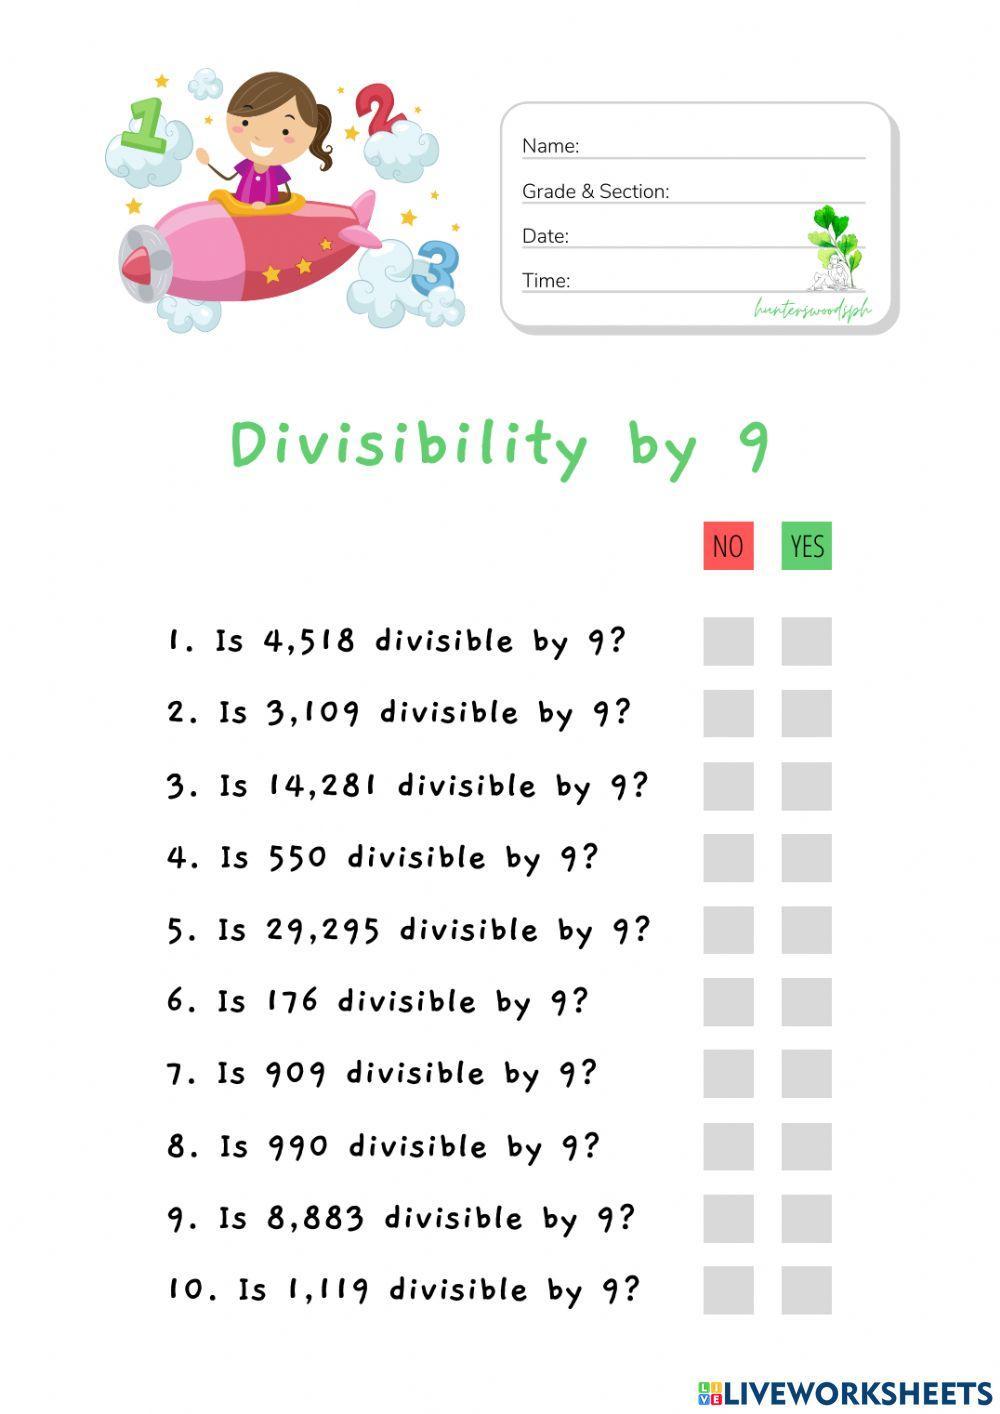 Divisibility by 9 (HuntersWoodsPH Math)